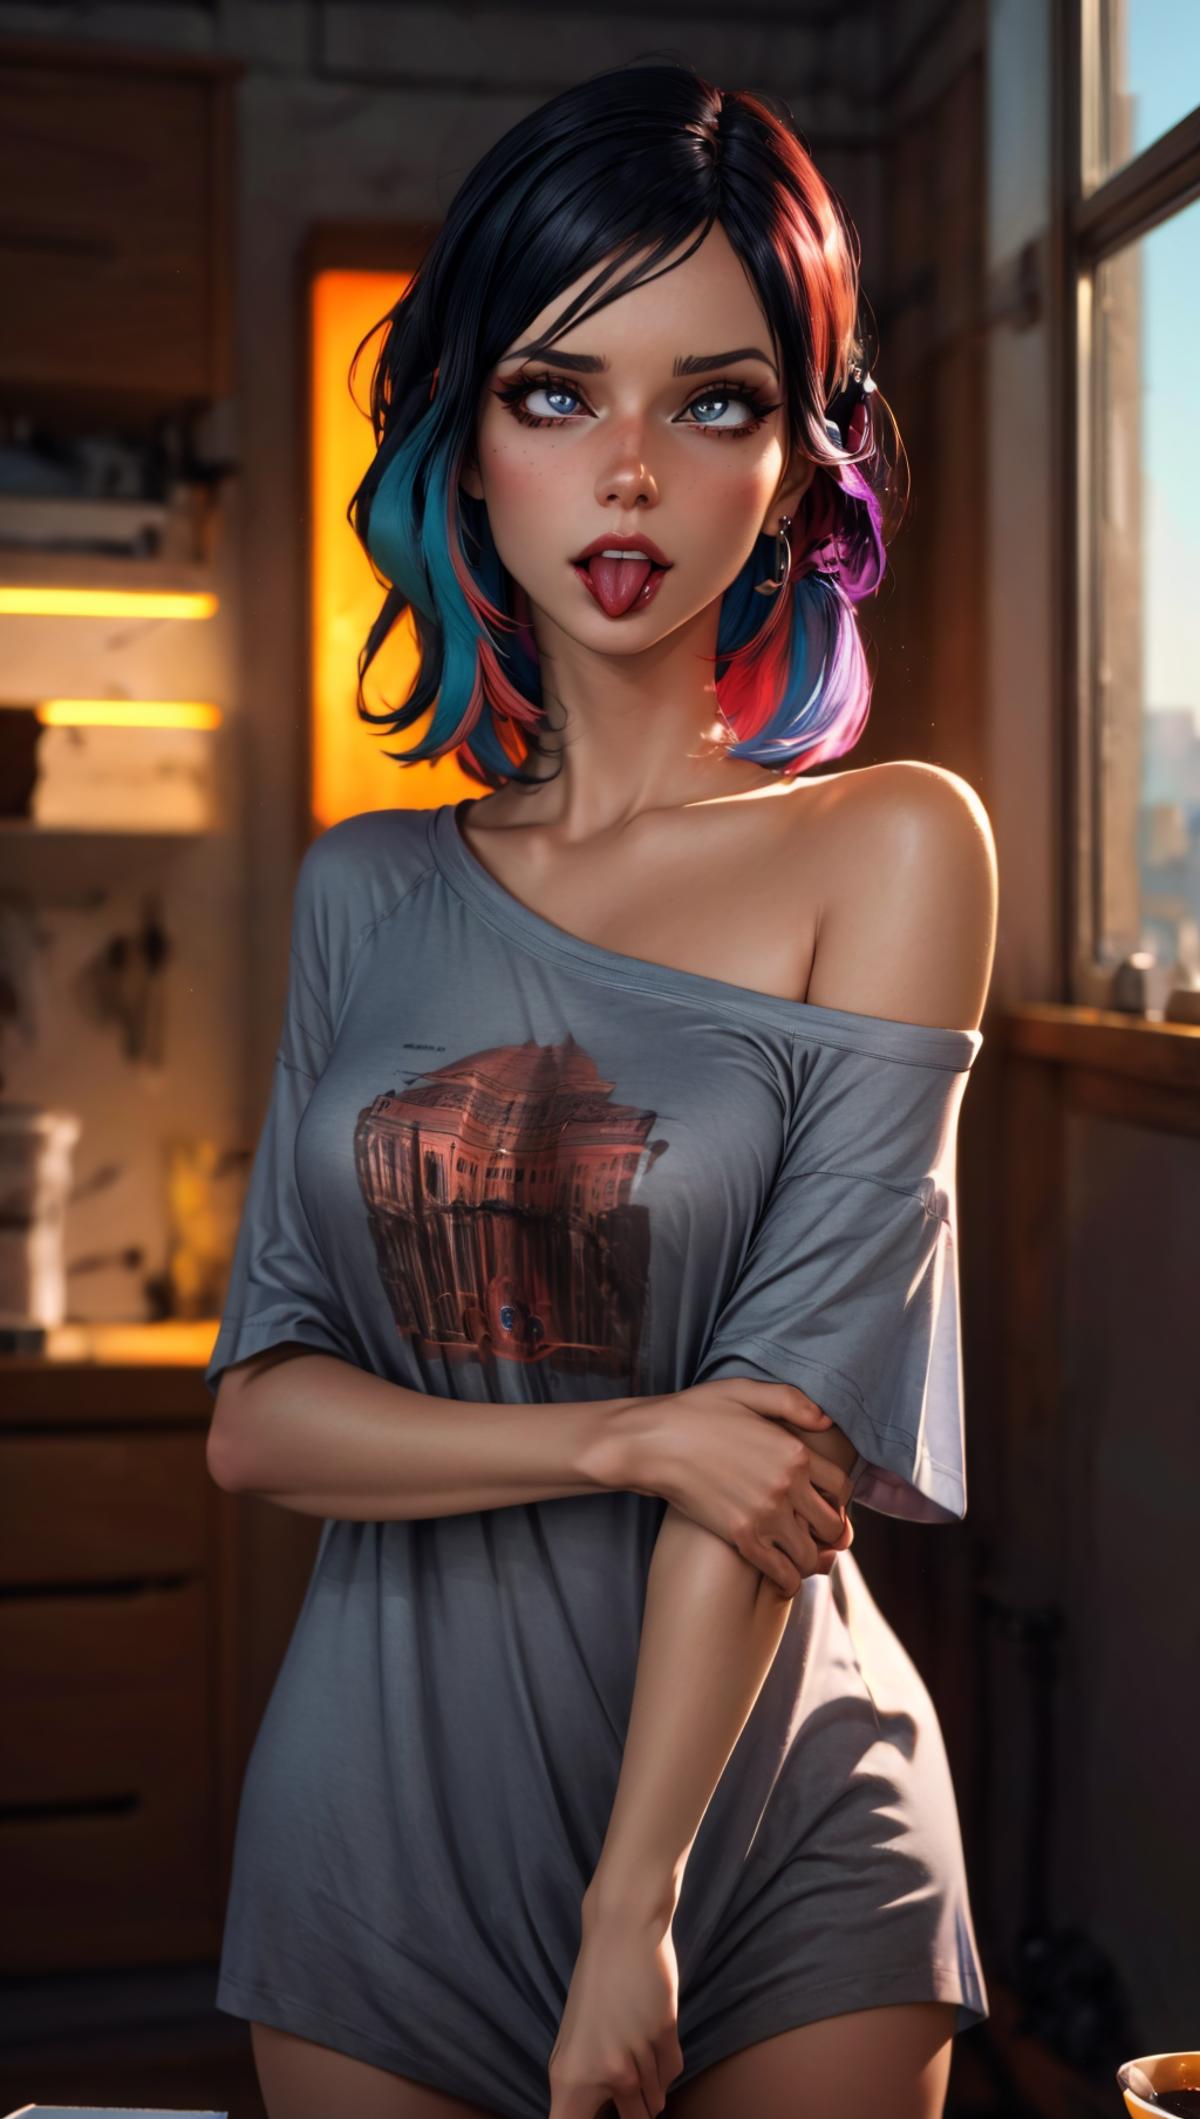 A cartoon girl with colorful hair wearing a grey shirt and sticking out her tongue.